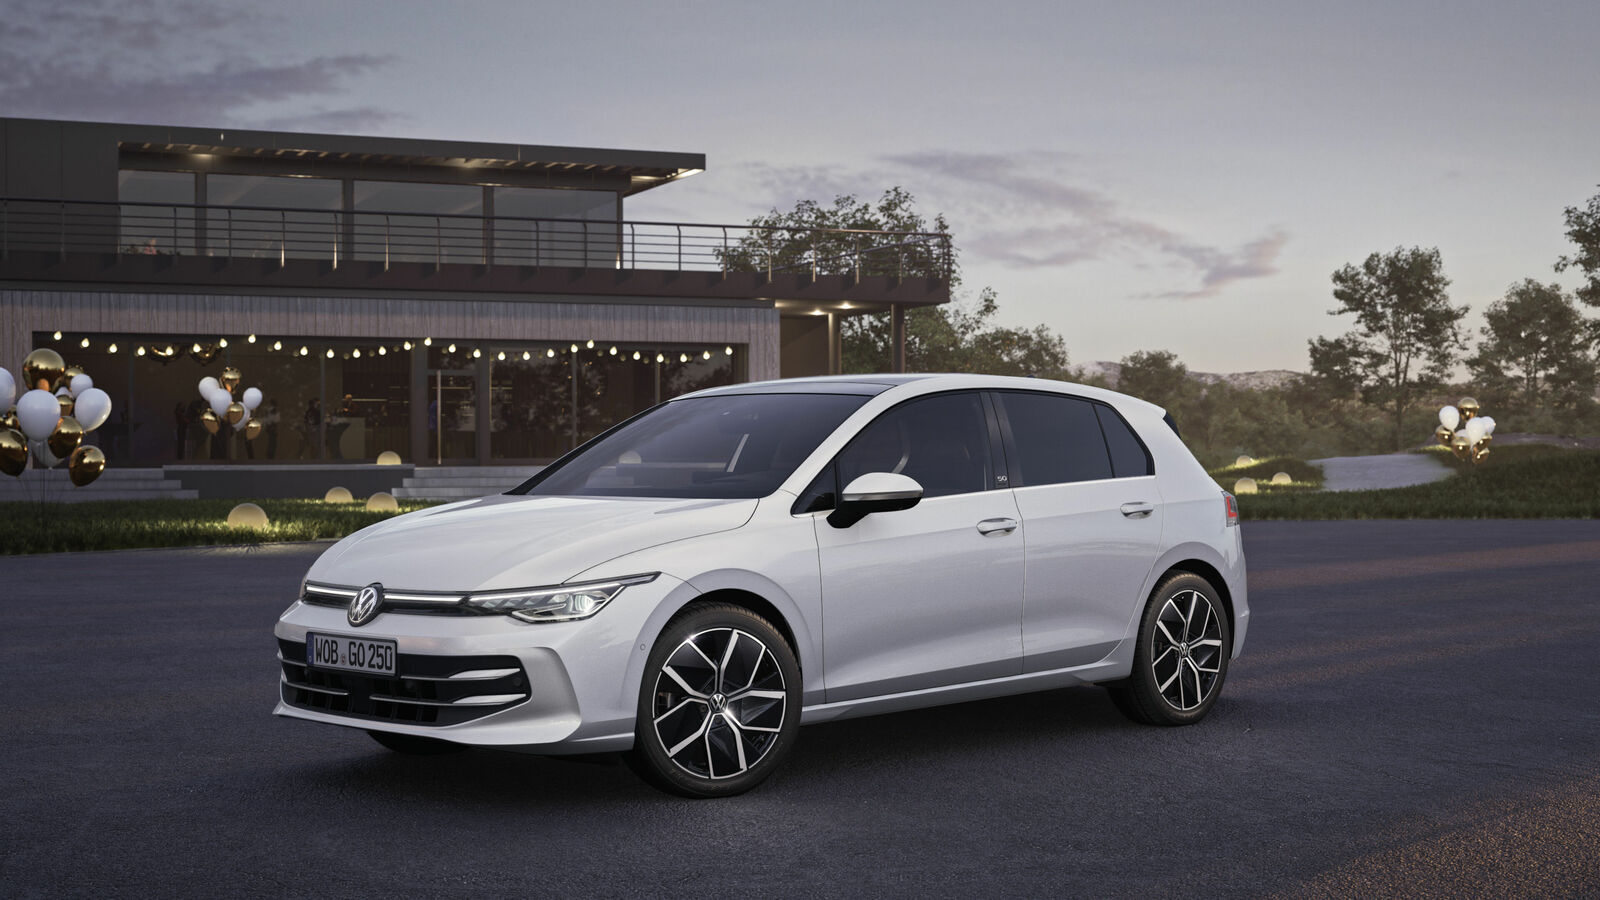 The new Volkswagen special model Golf "Edition 50"